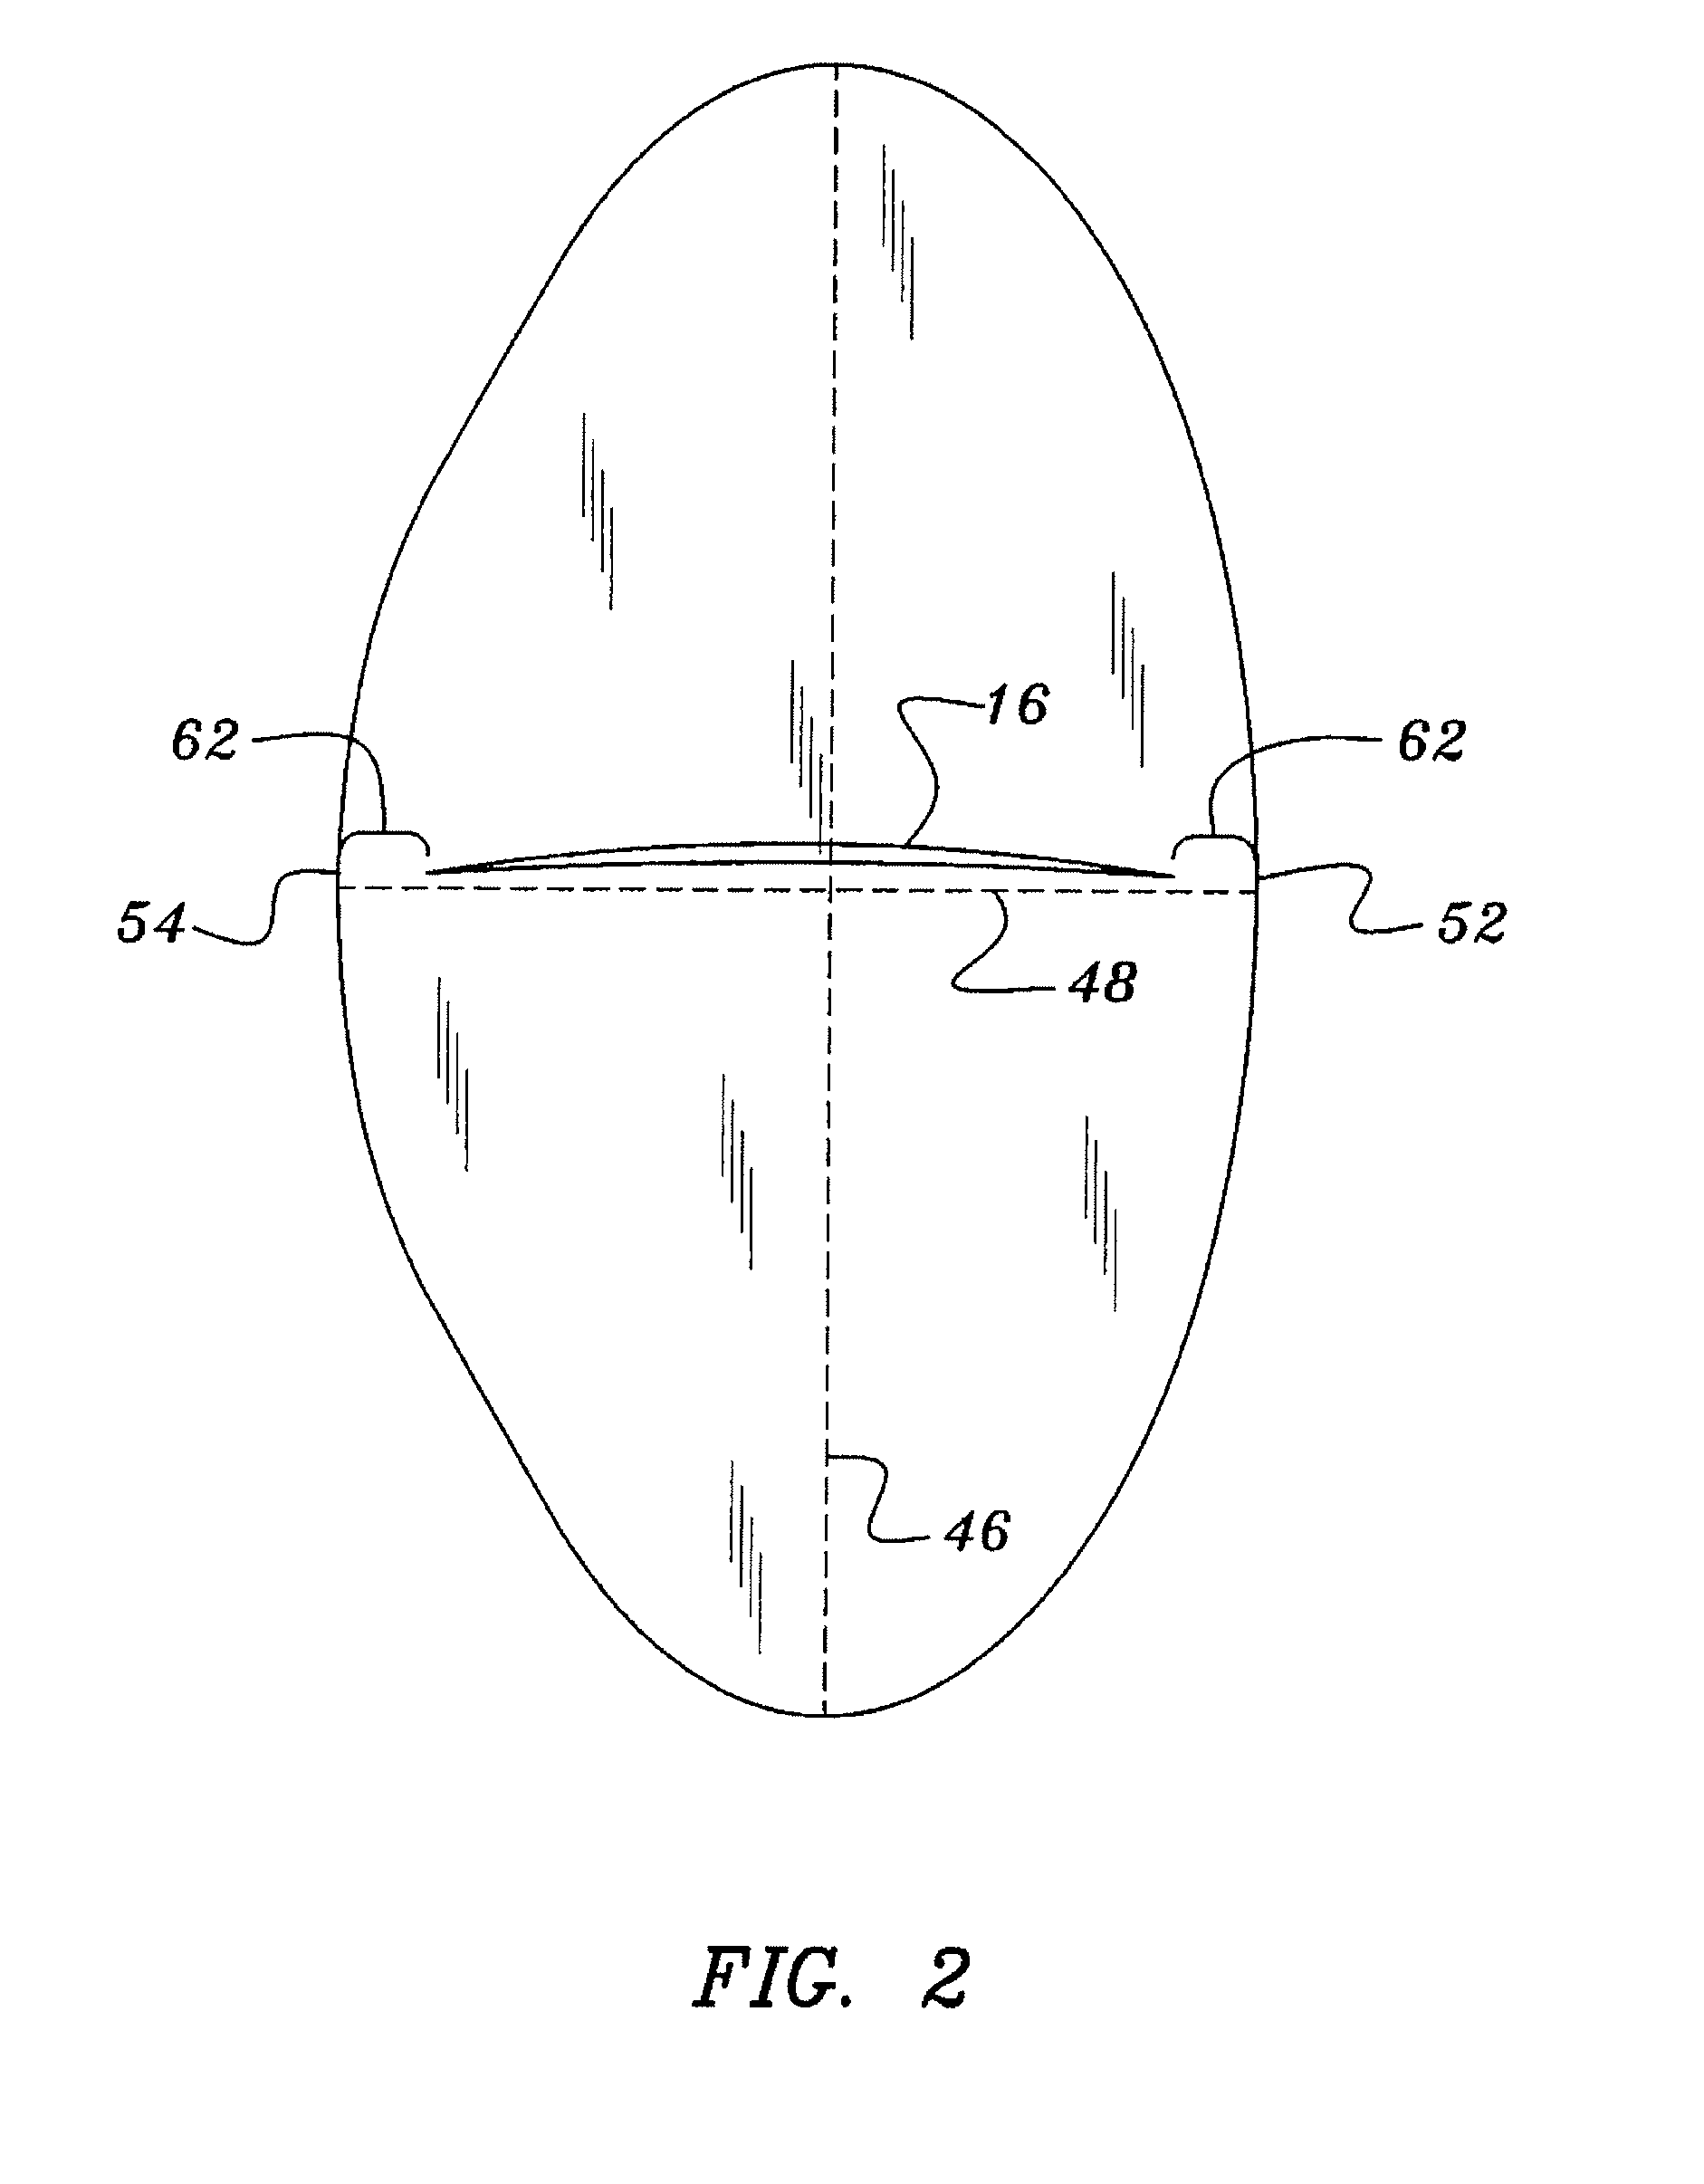 Bicuspid vascular valve and methods for making and implanting same